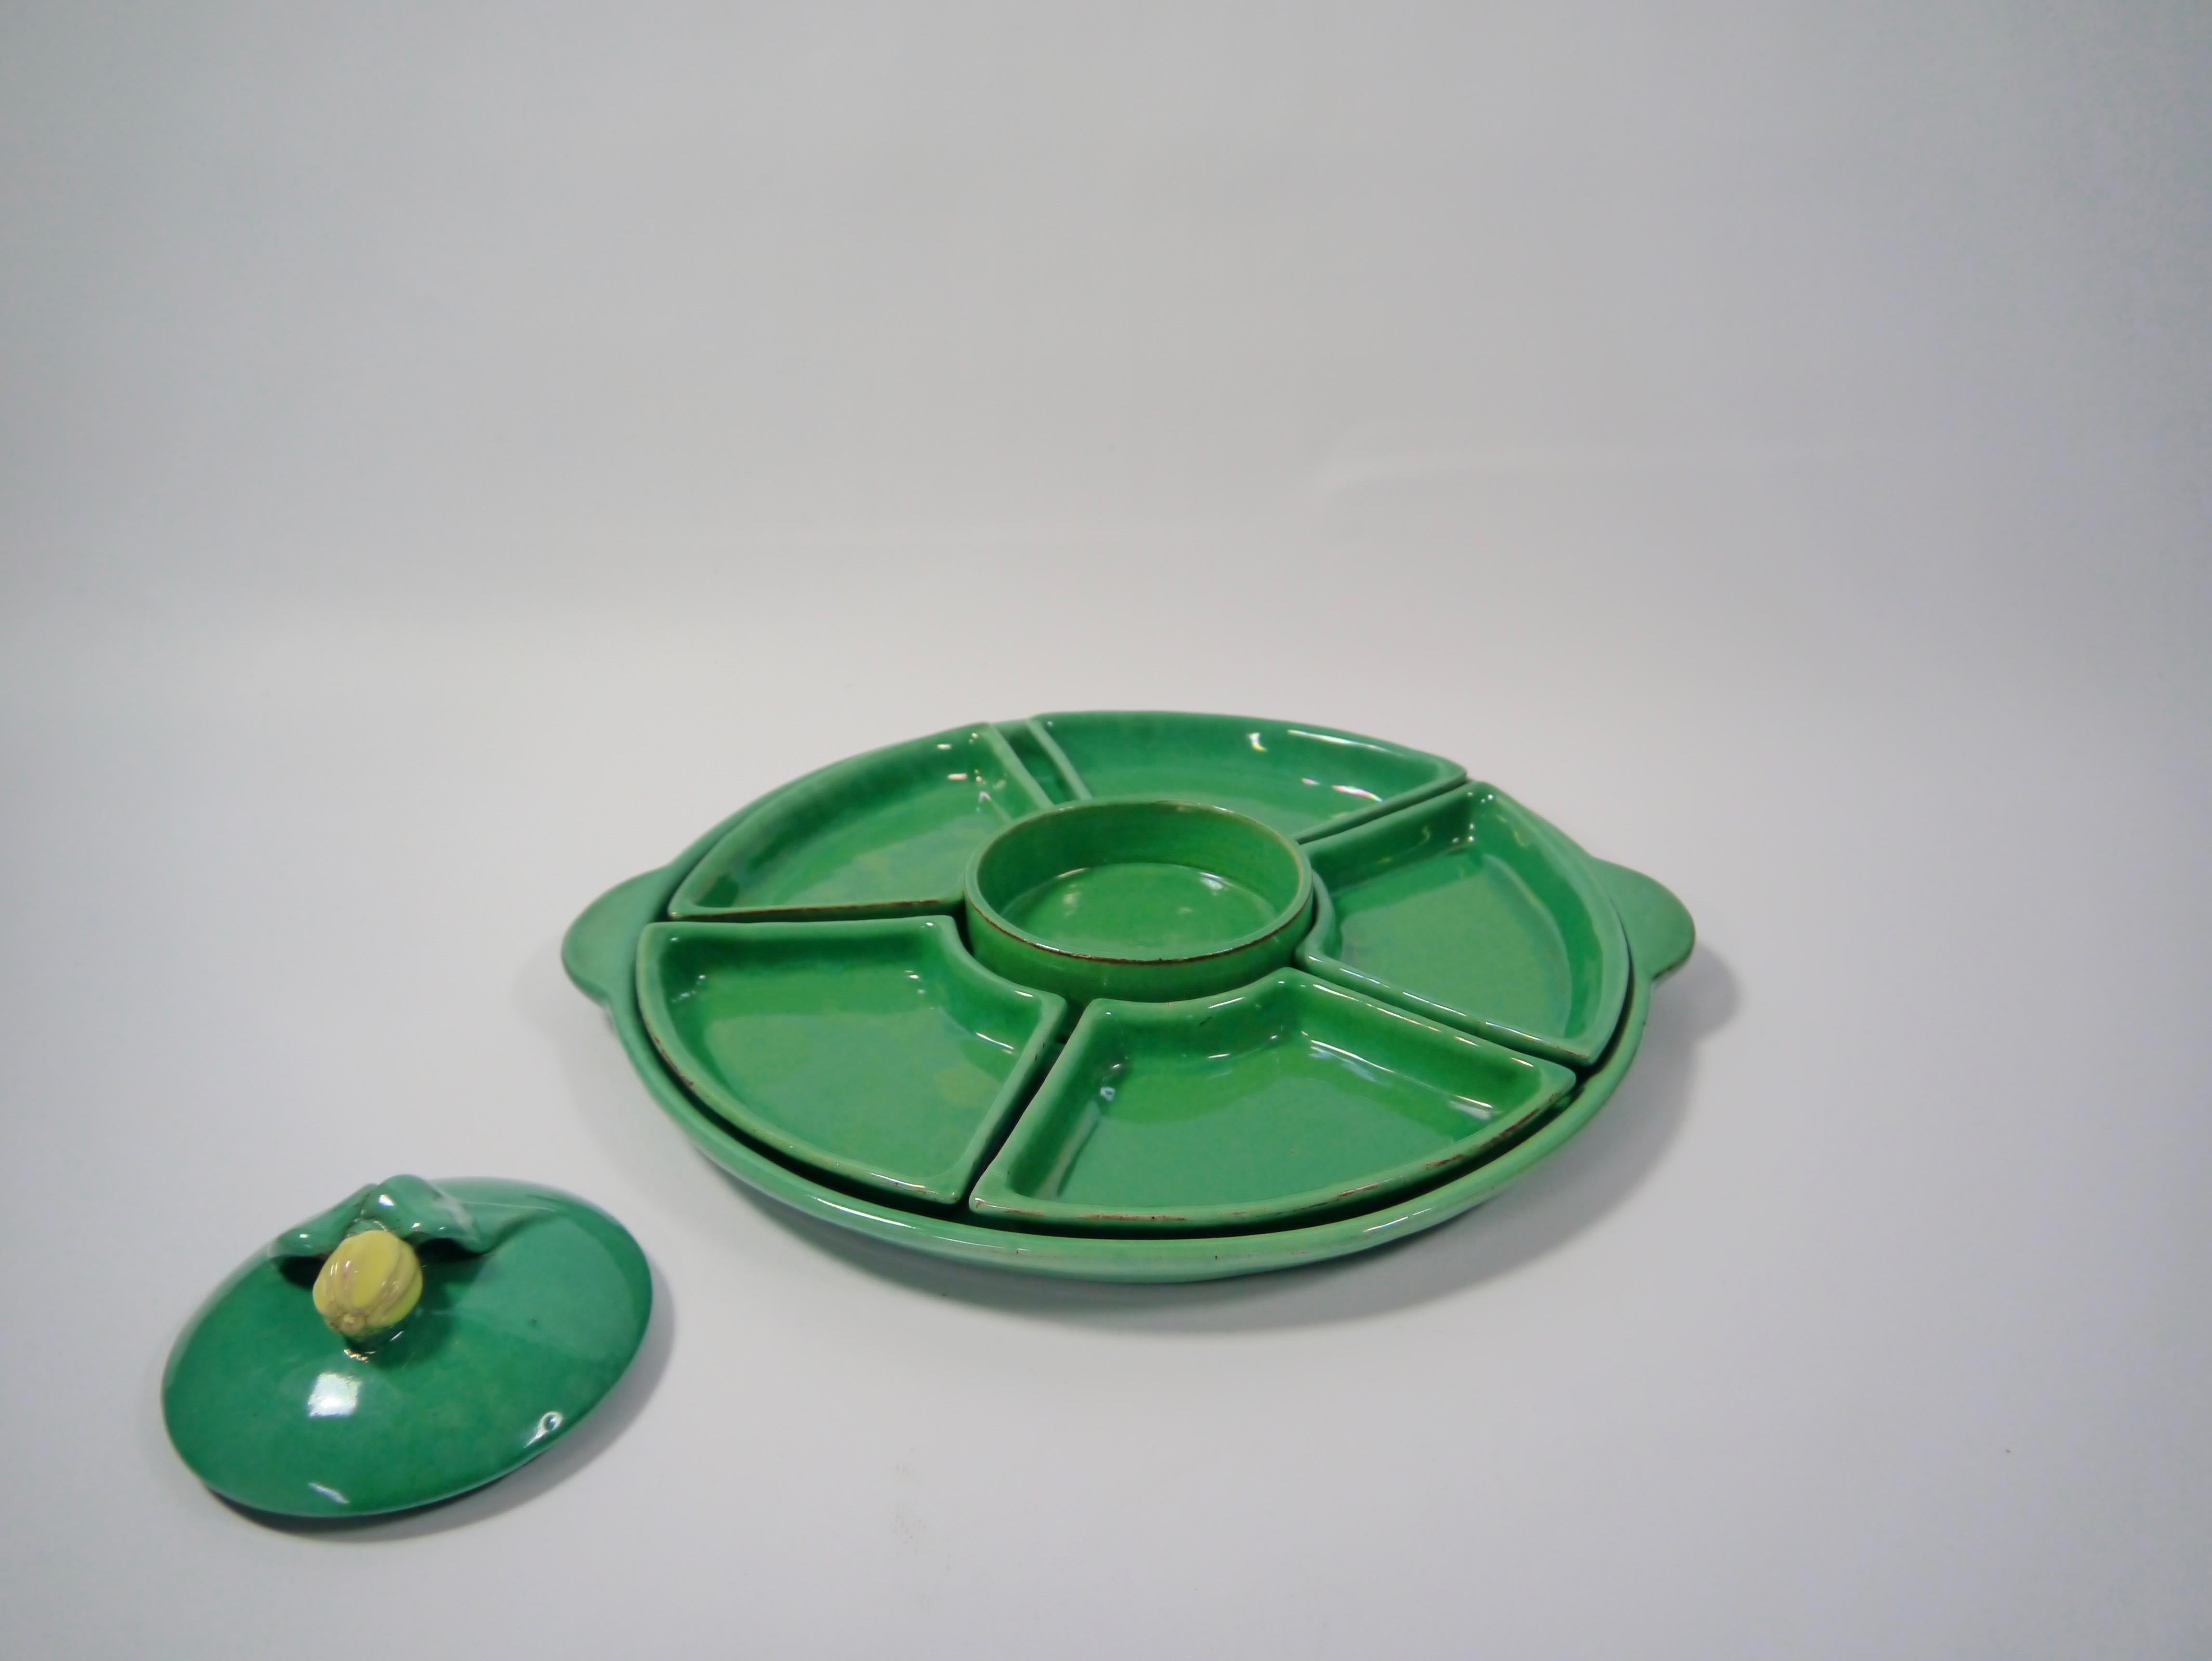 Glazed Art Nouveau Ceramic Serving Dish by Andreas Schneider, Norway, 1910s For Sale